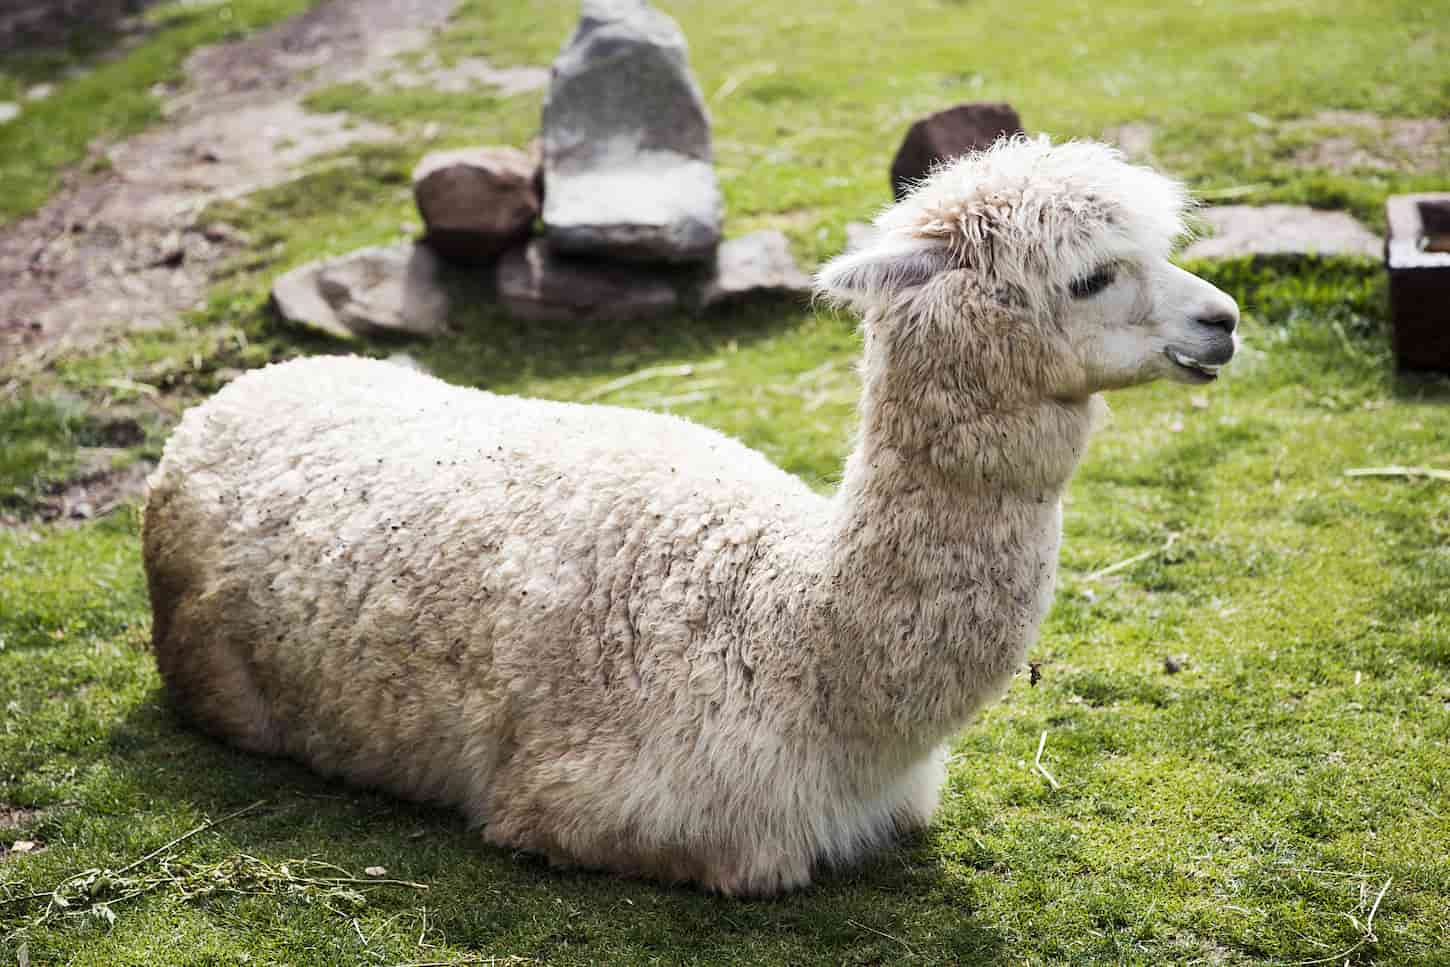 An image of a cute little baby alpaca laying down in the field.